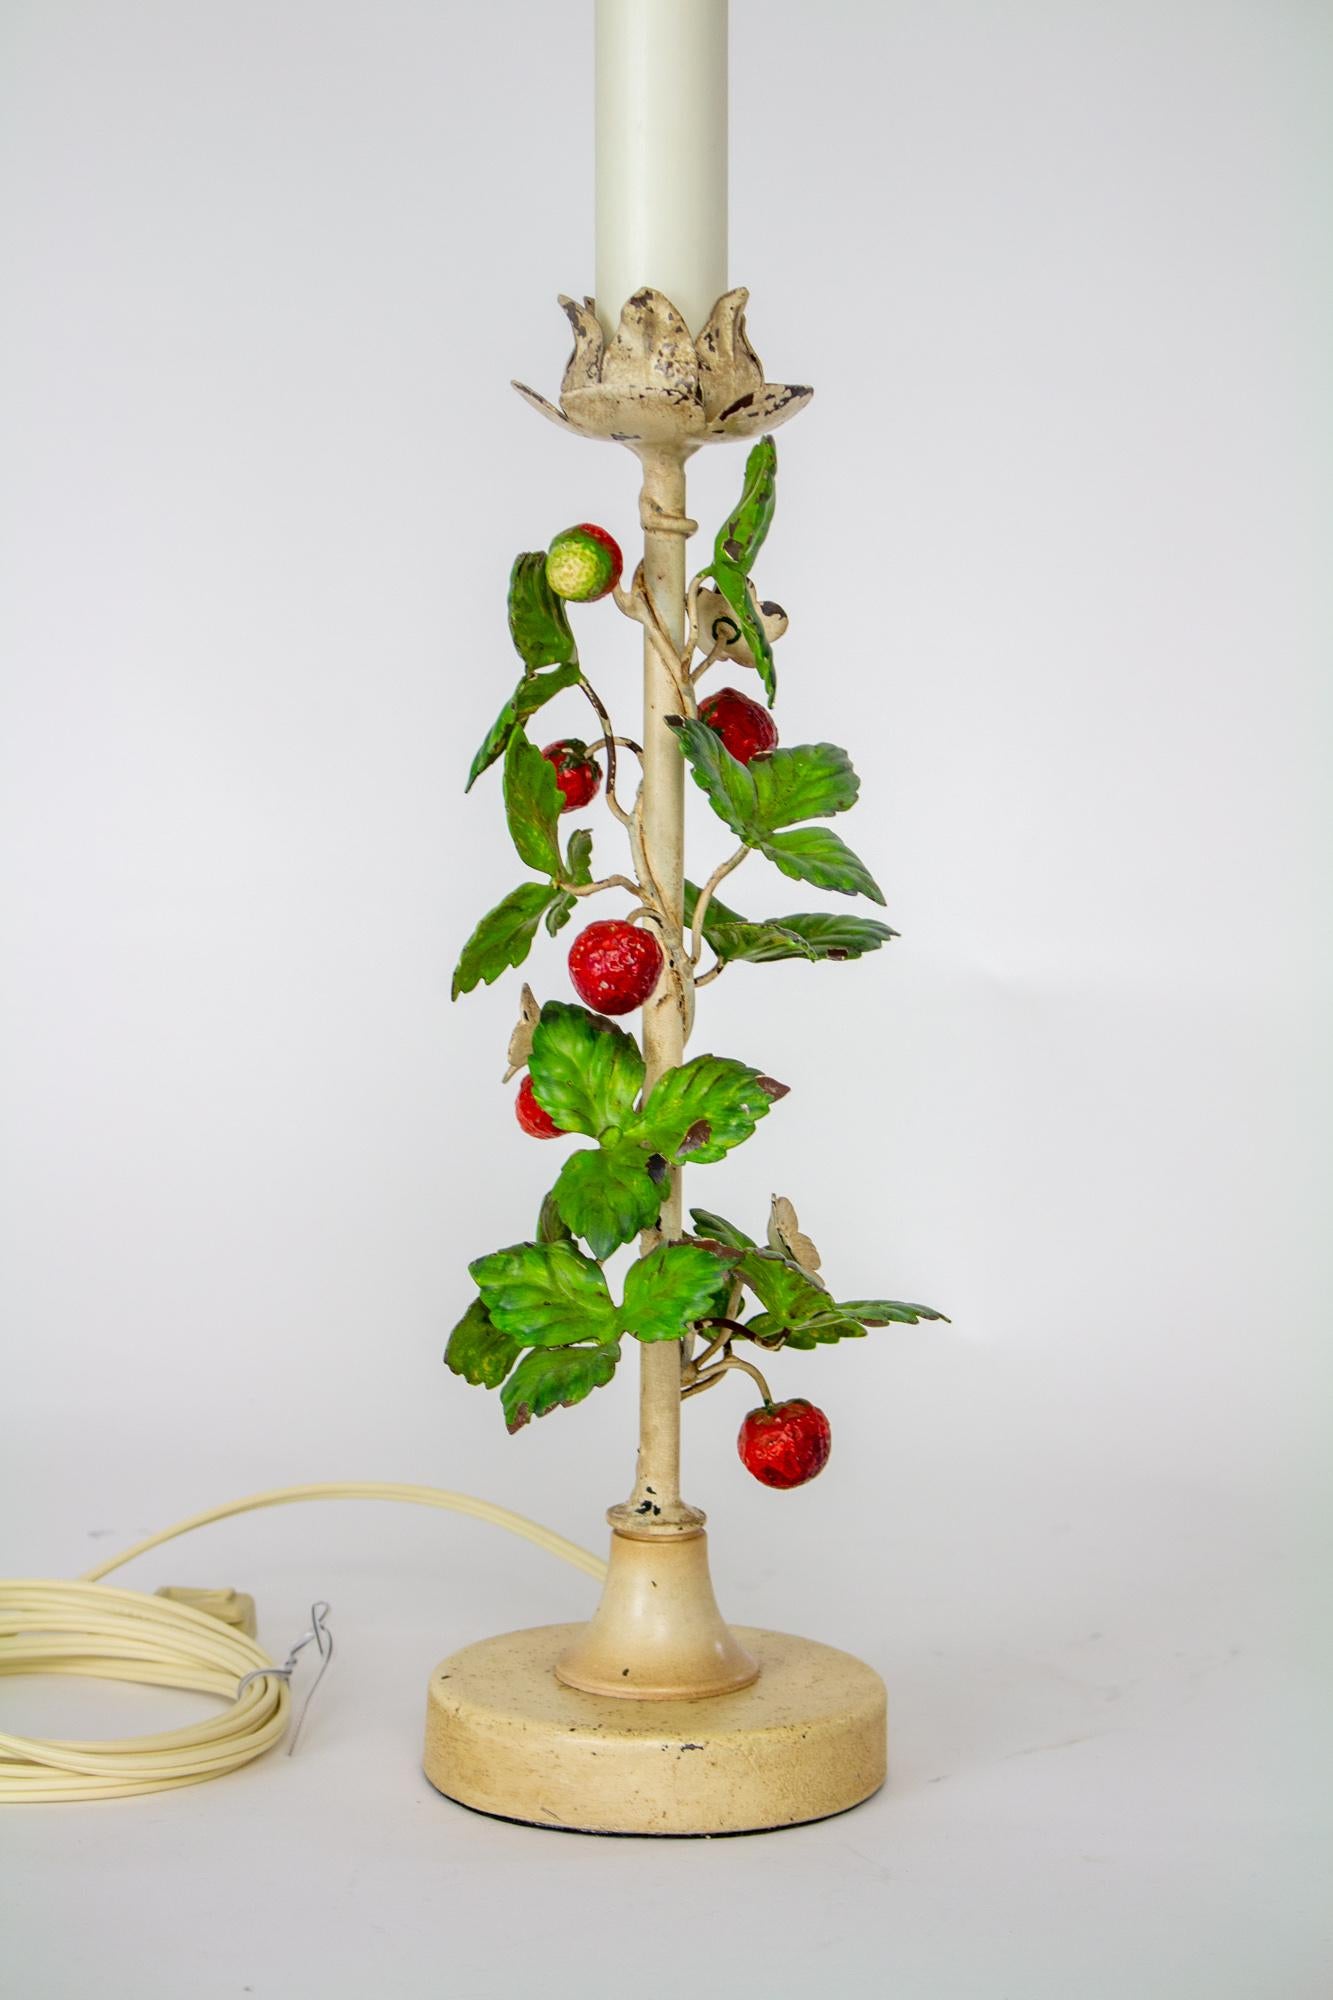 Vintage tole strawberry lamp. Original antique white painted finish with curved branches of strawberry leaves and fruit winding around the stem. Original painted finish in aged condition. Clean, but with some chips as shown in photos. Rewired with